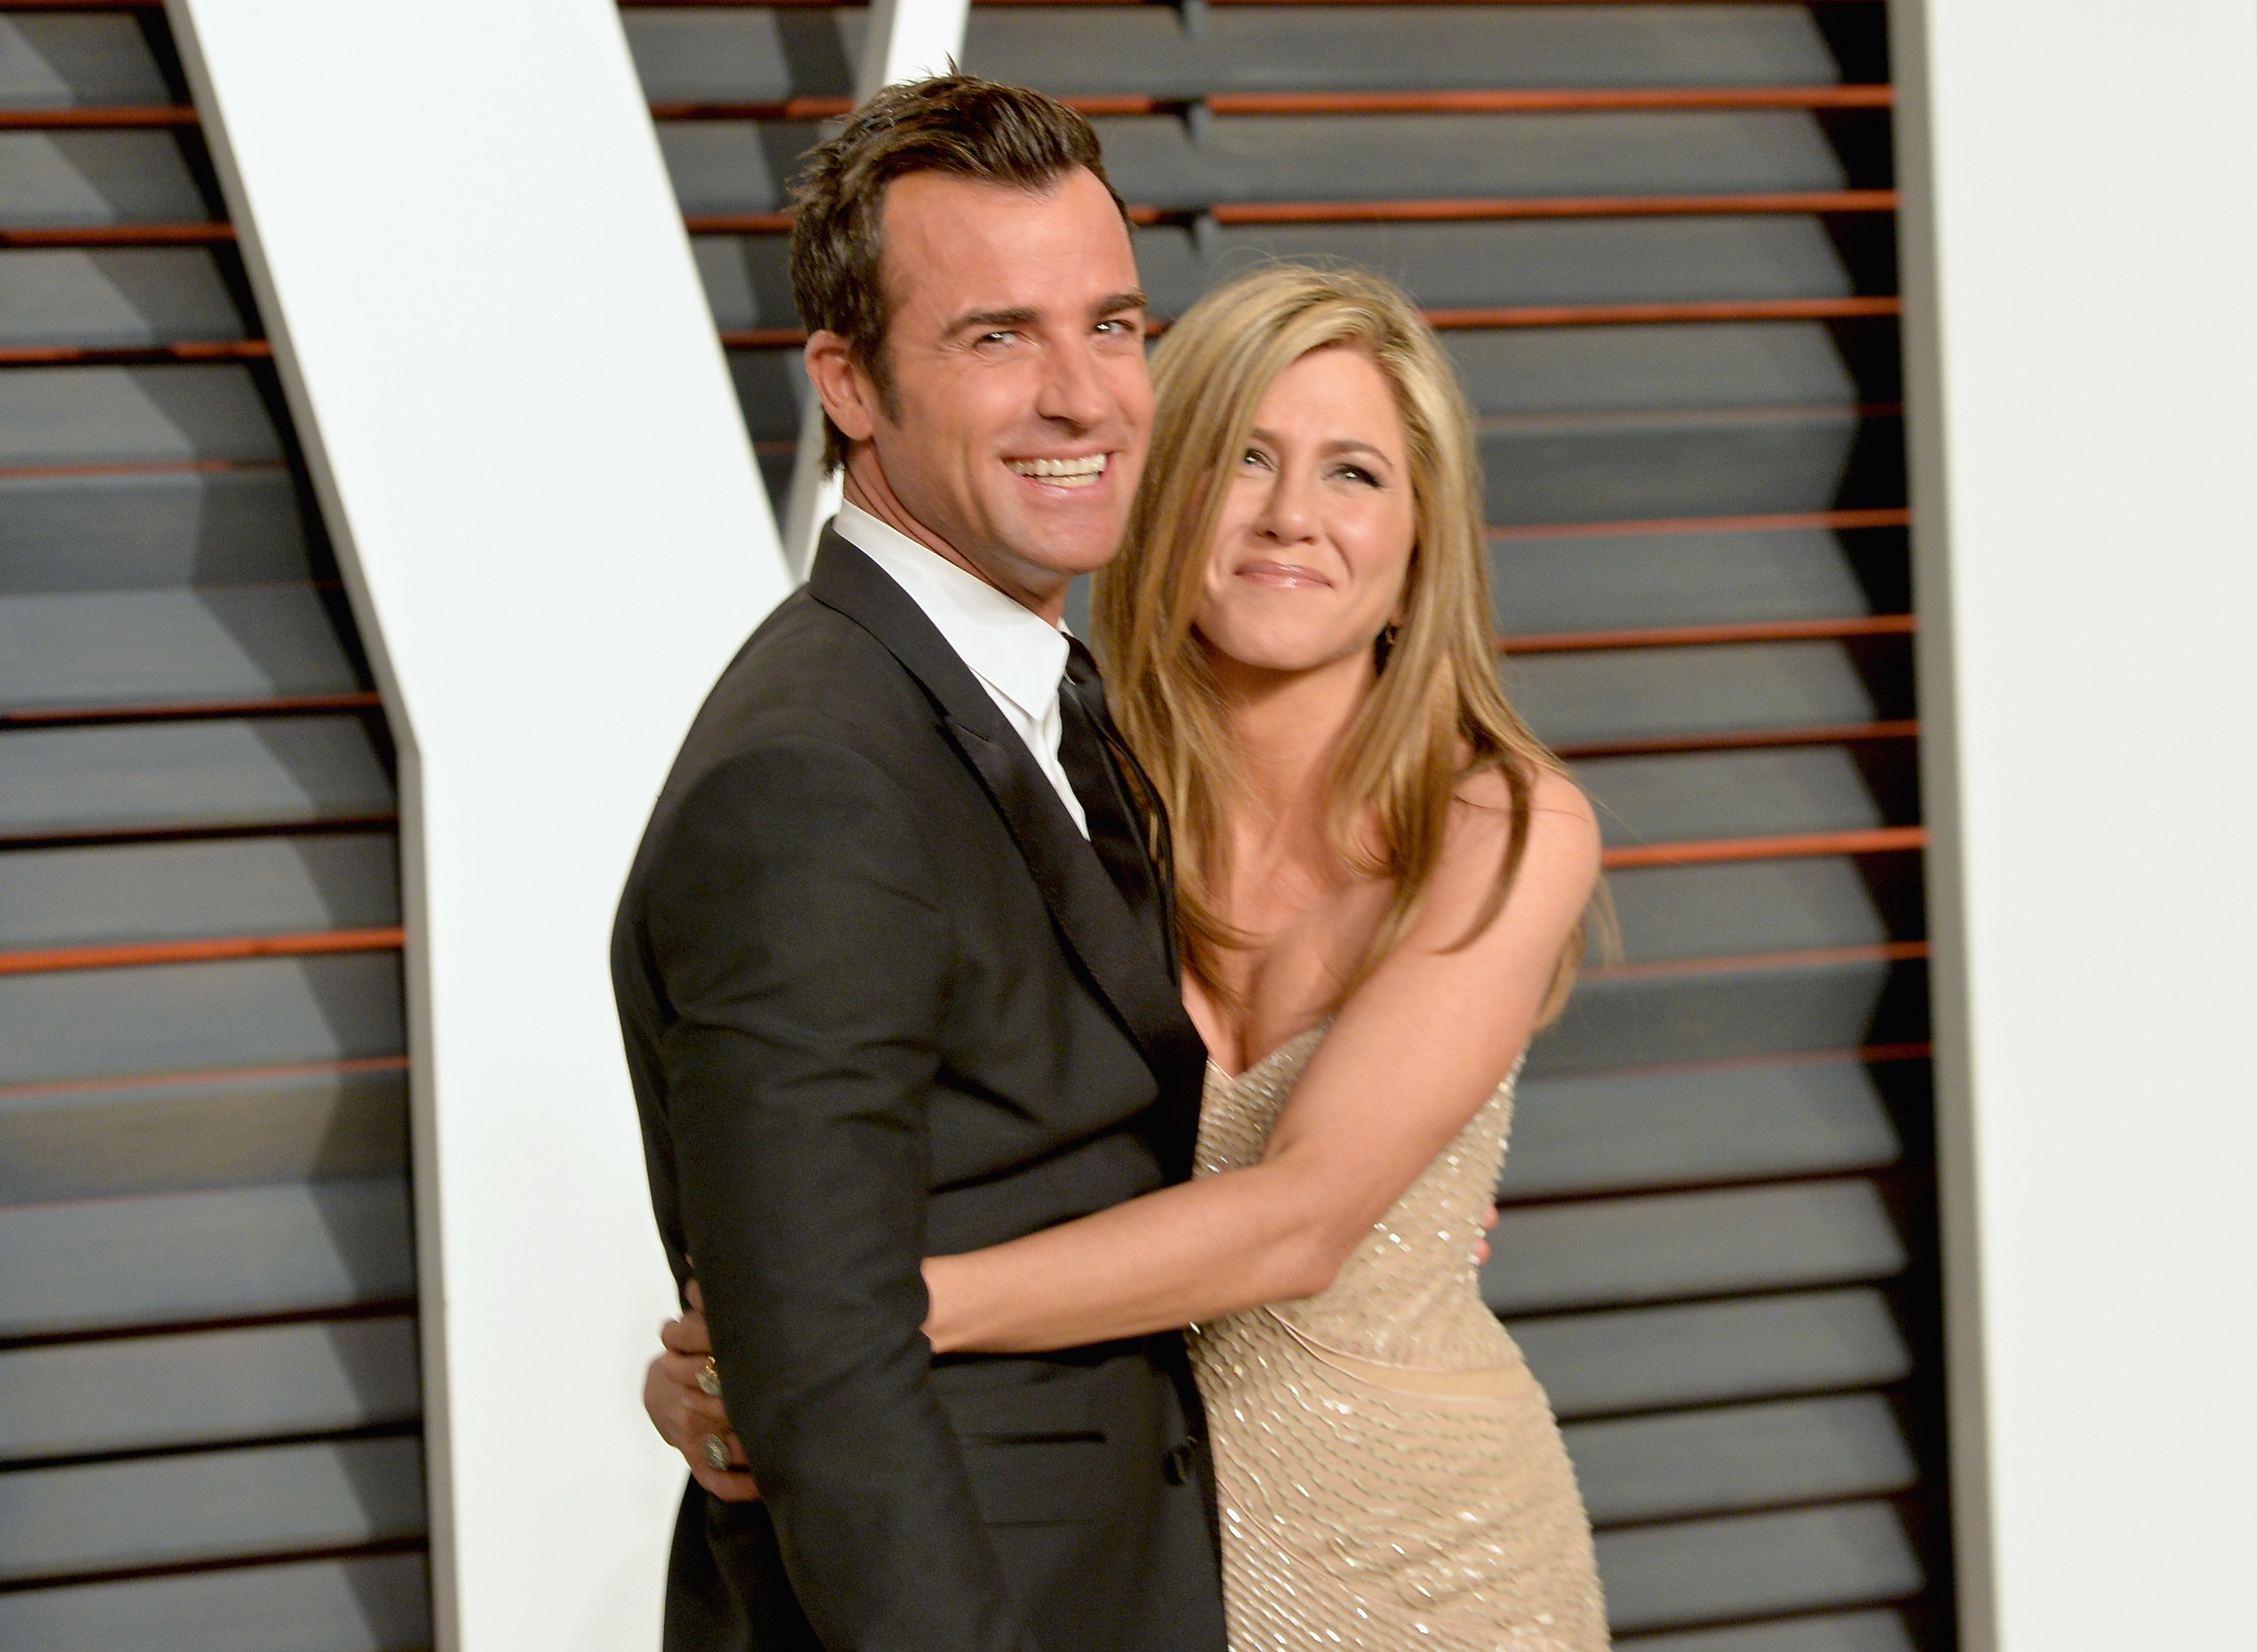 Theroux and Aniston at the 2015 Vanity Fair Oscar Party